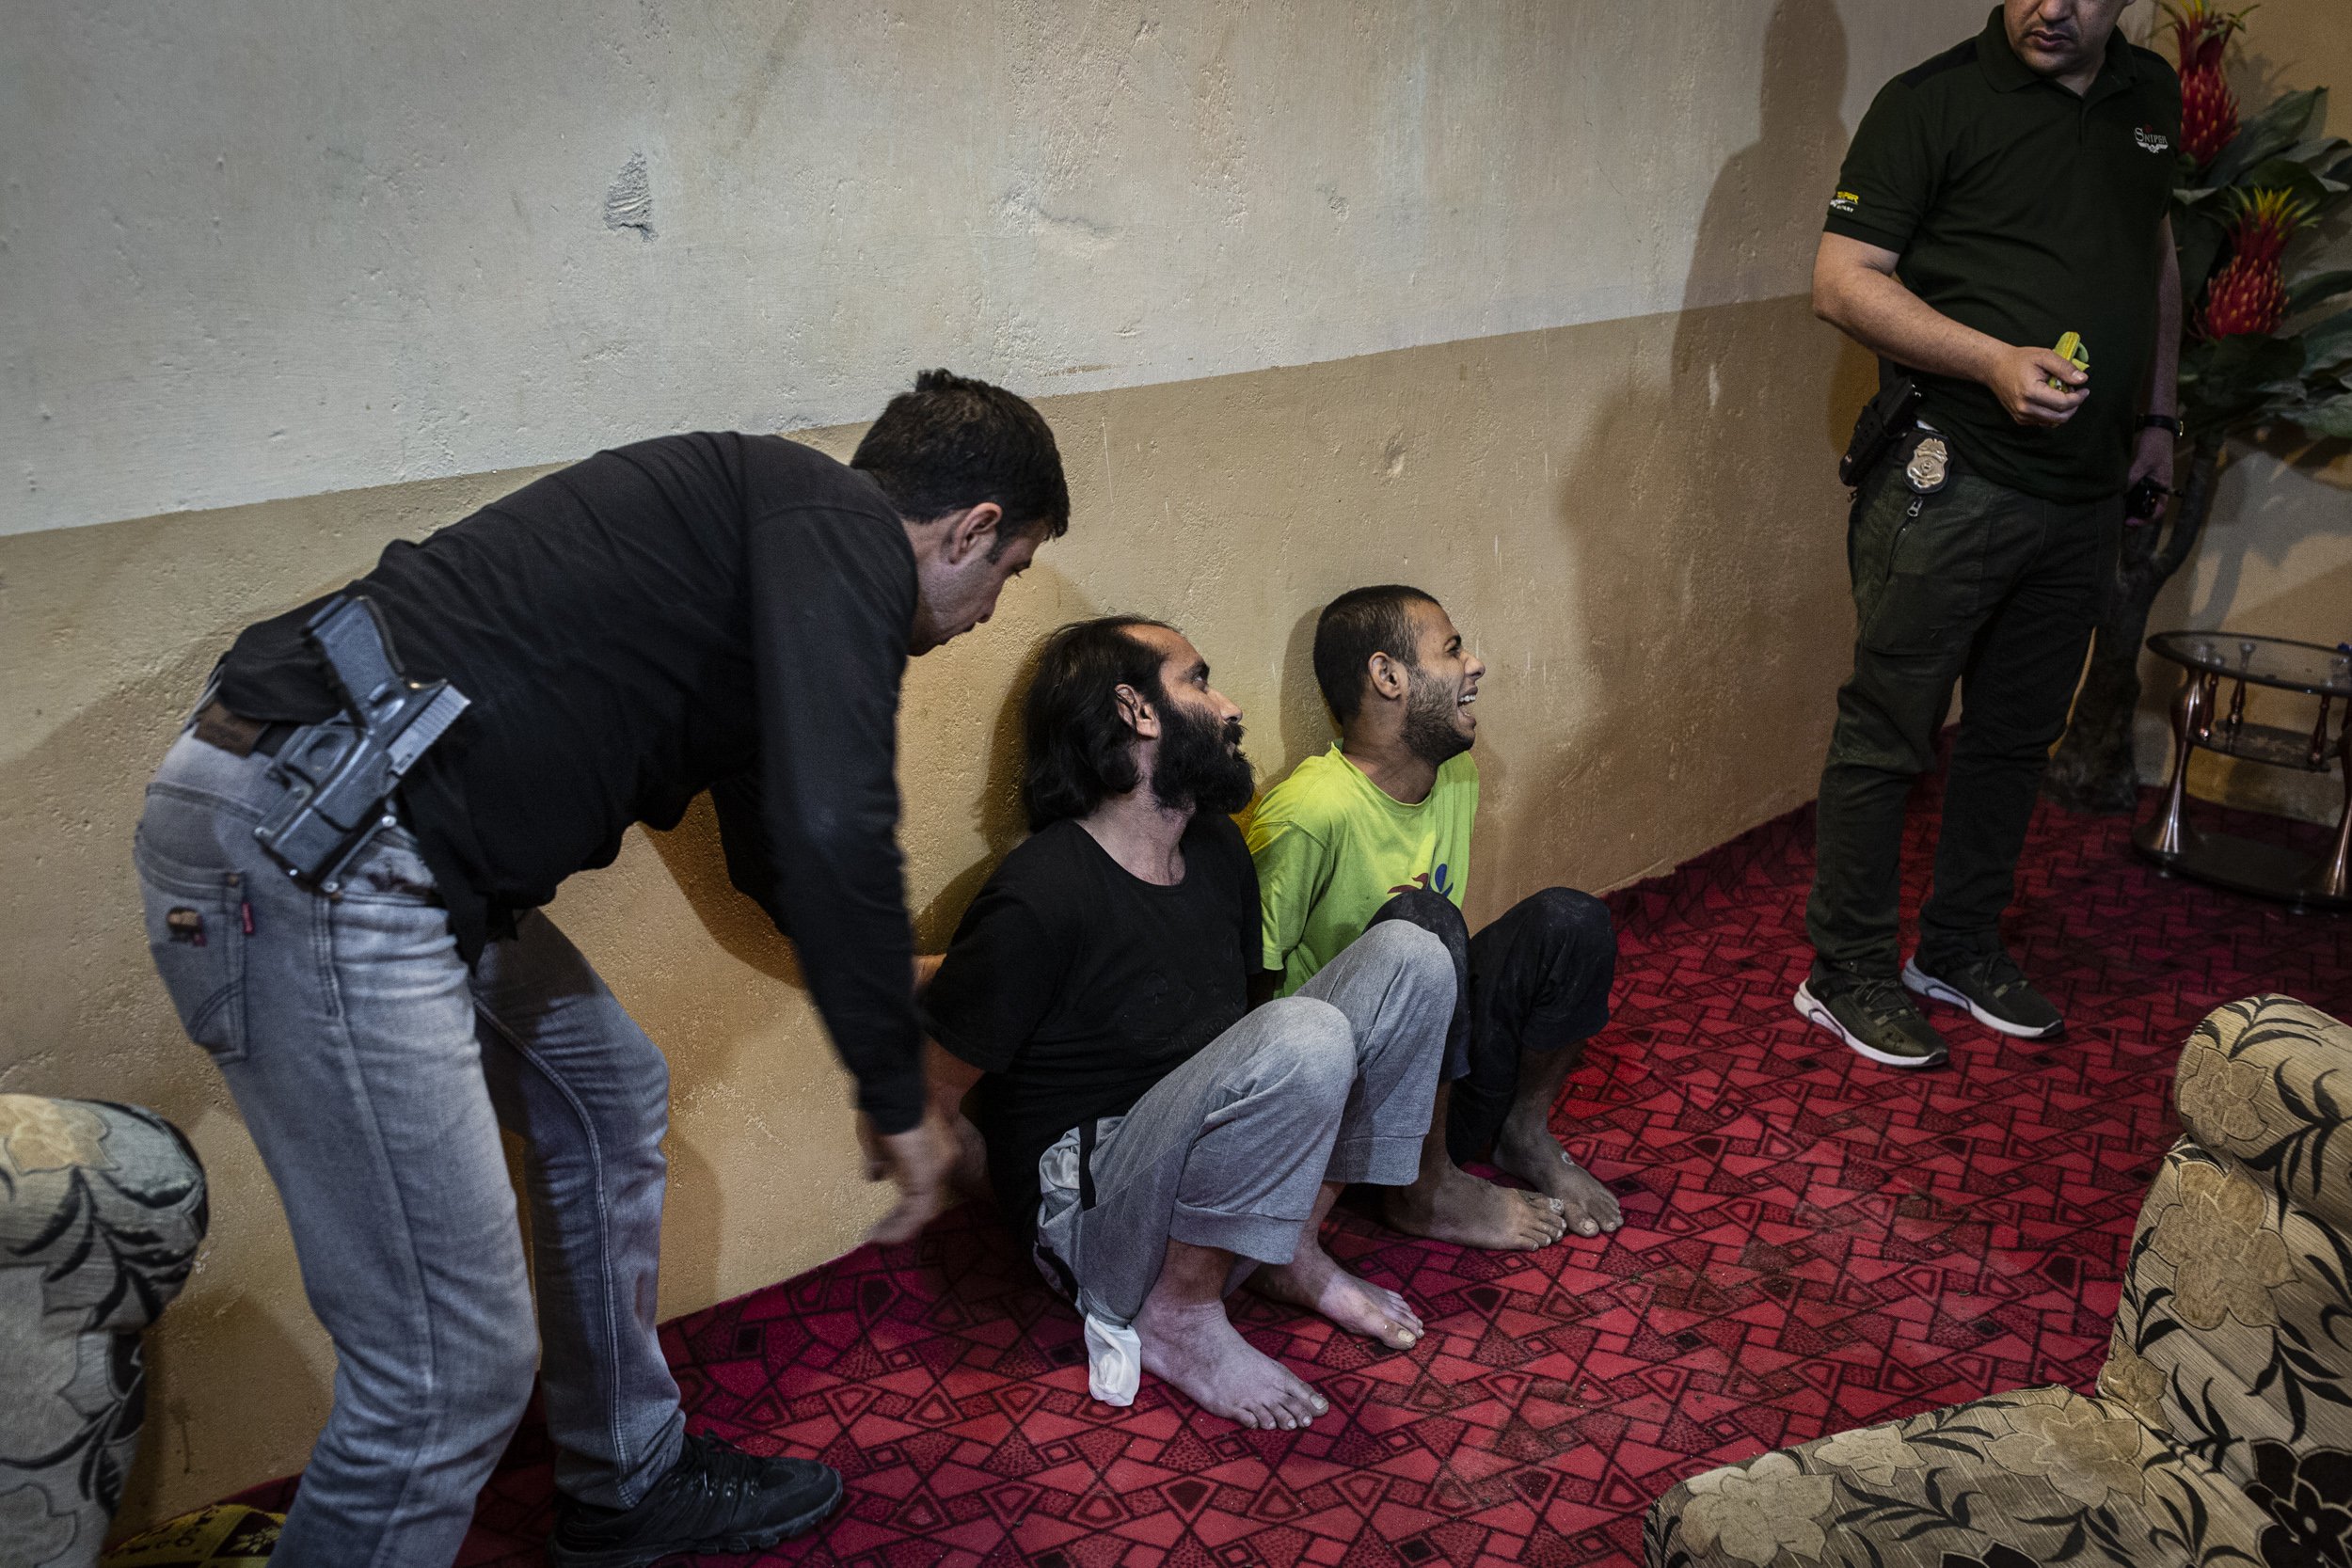  Two drug addicts were arrested during a night time raid targeting a known drug dealer in Basra, Iraq. The main suspect was not captured but instead a number of the man’s friends and relatives were arrested for drug use. 